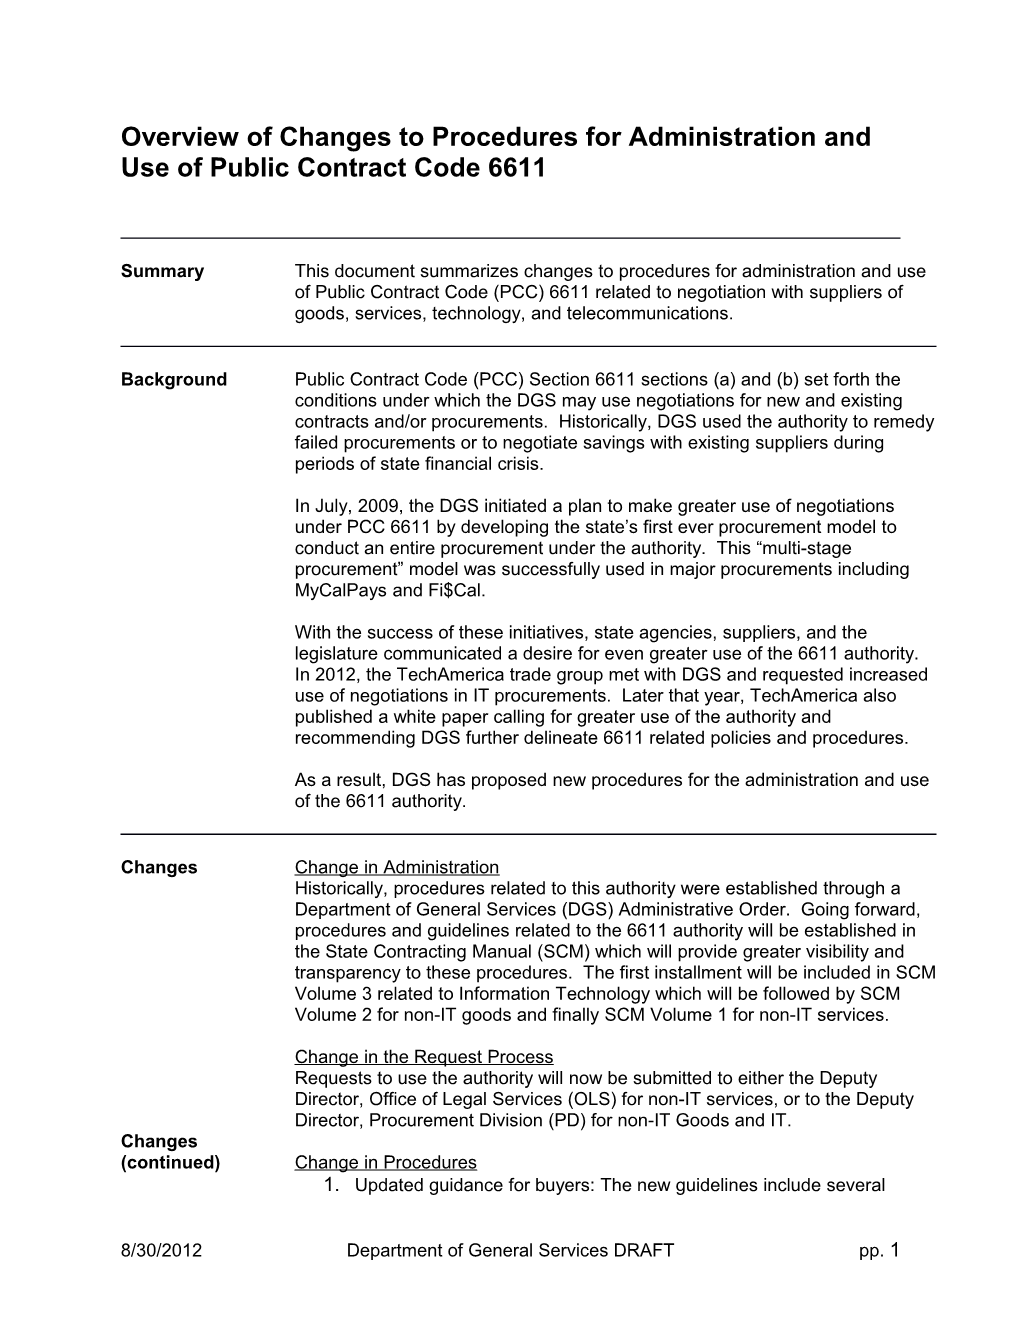 Overview of Changes to Procedures for Administration and Use of Public Contract Code 6611